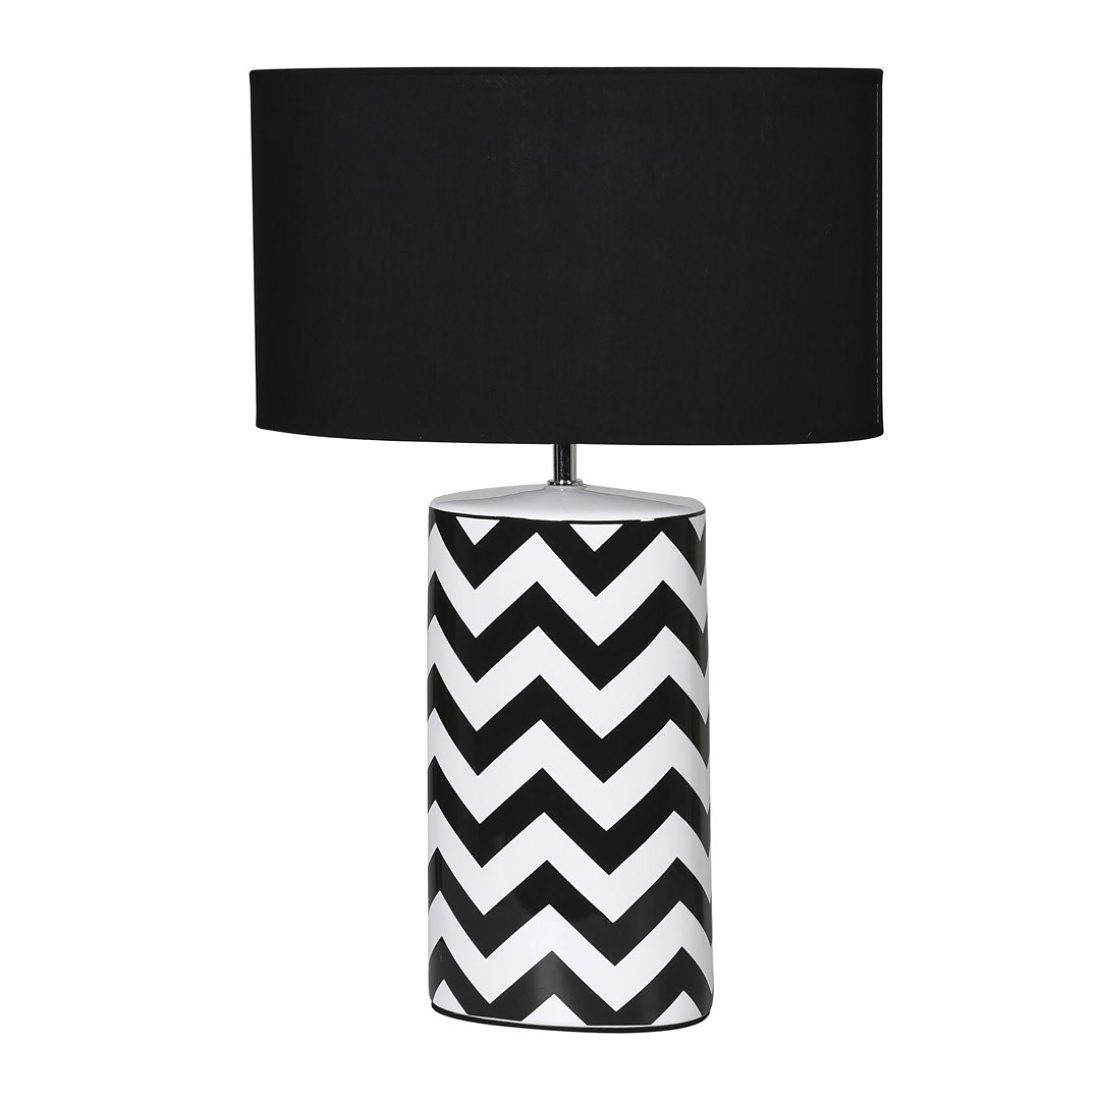 Monochrome Ceramic Table Lamp With, White Table Lamp With Black Shade